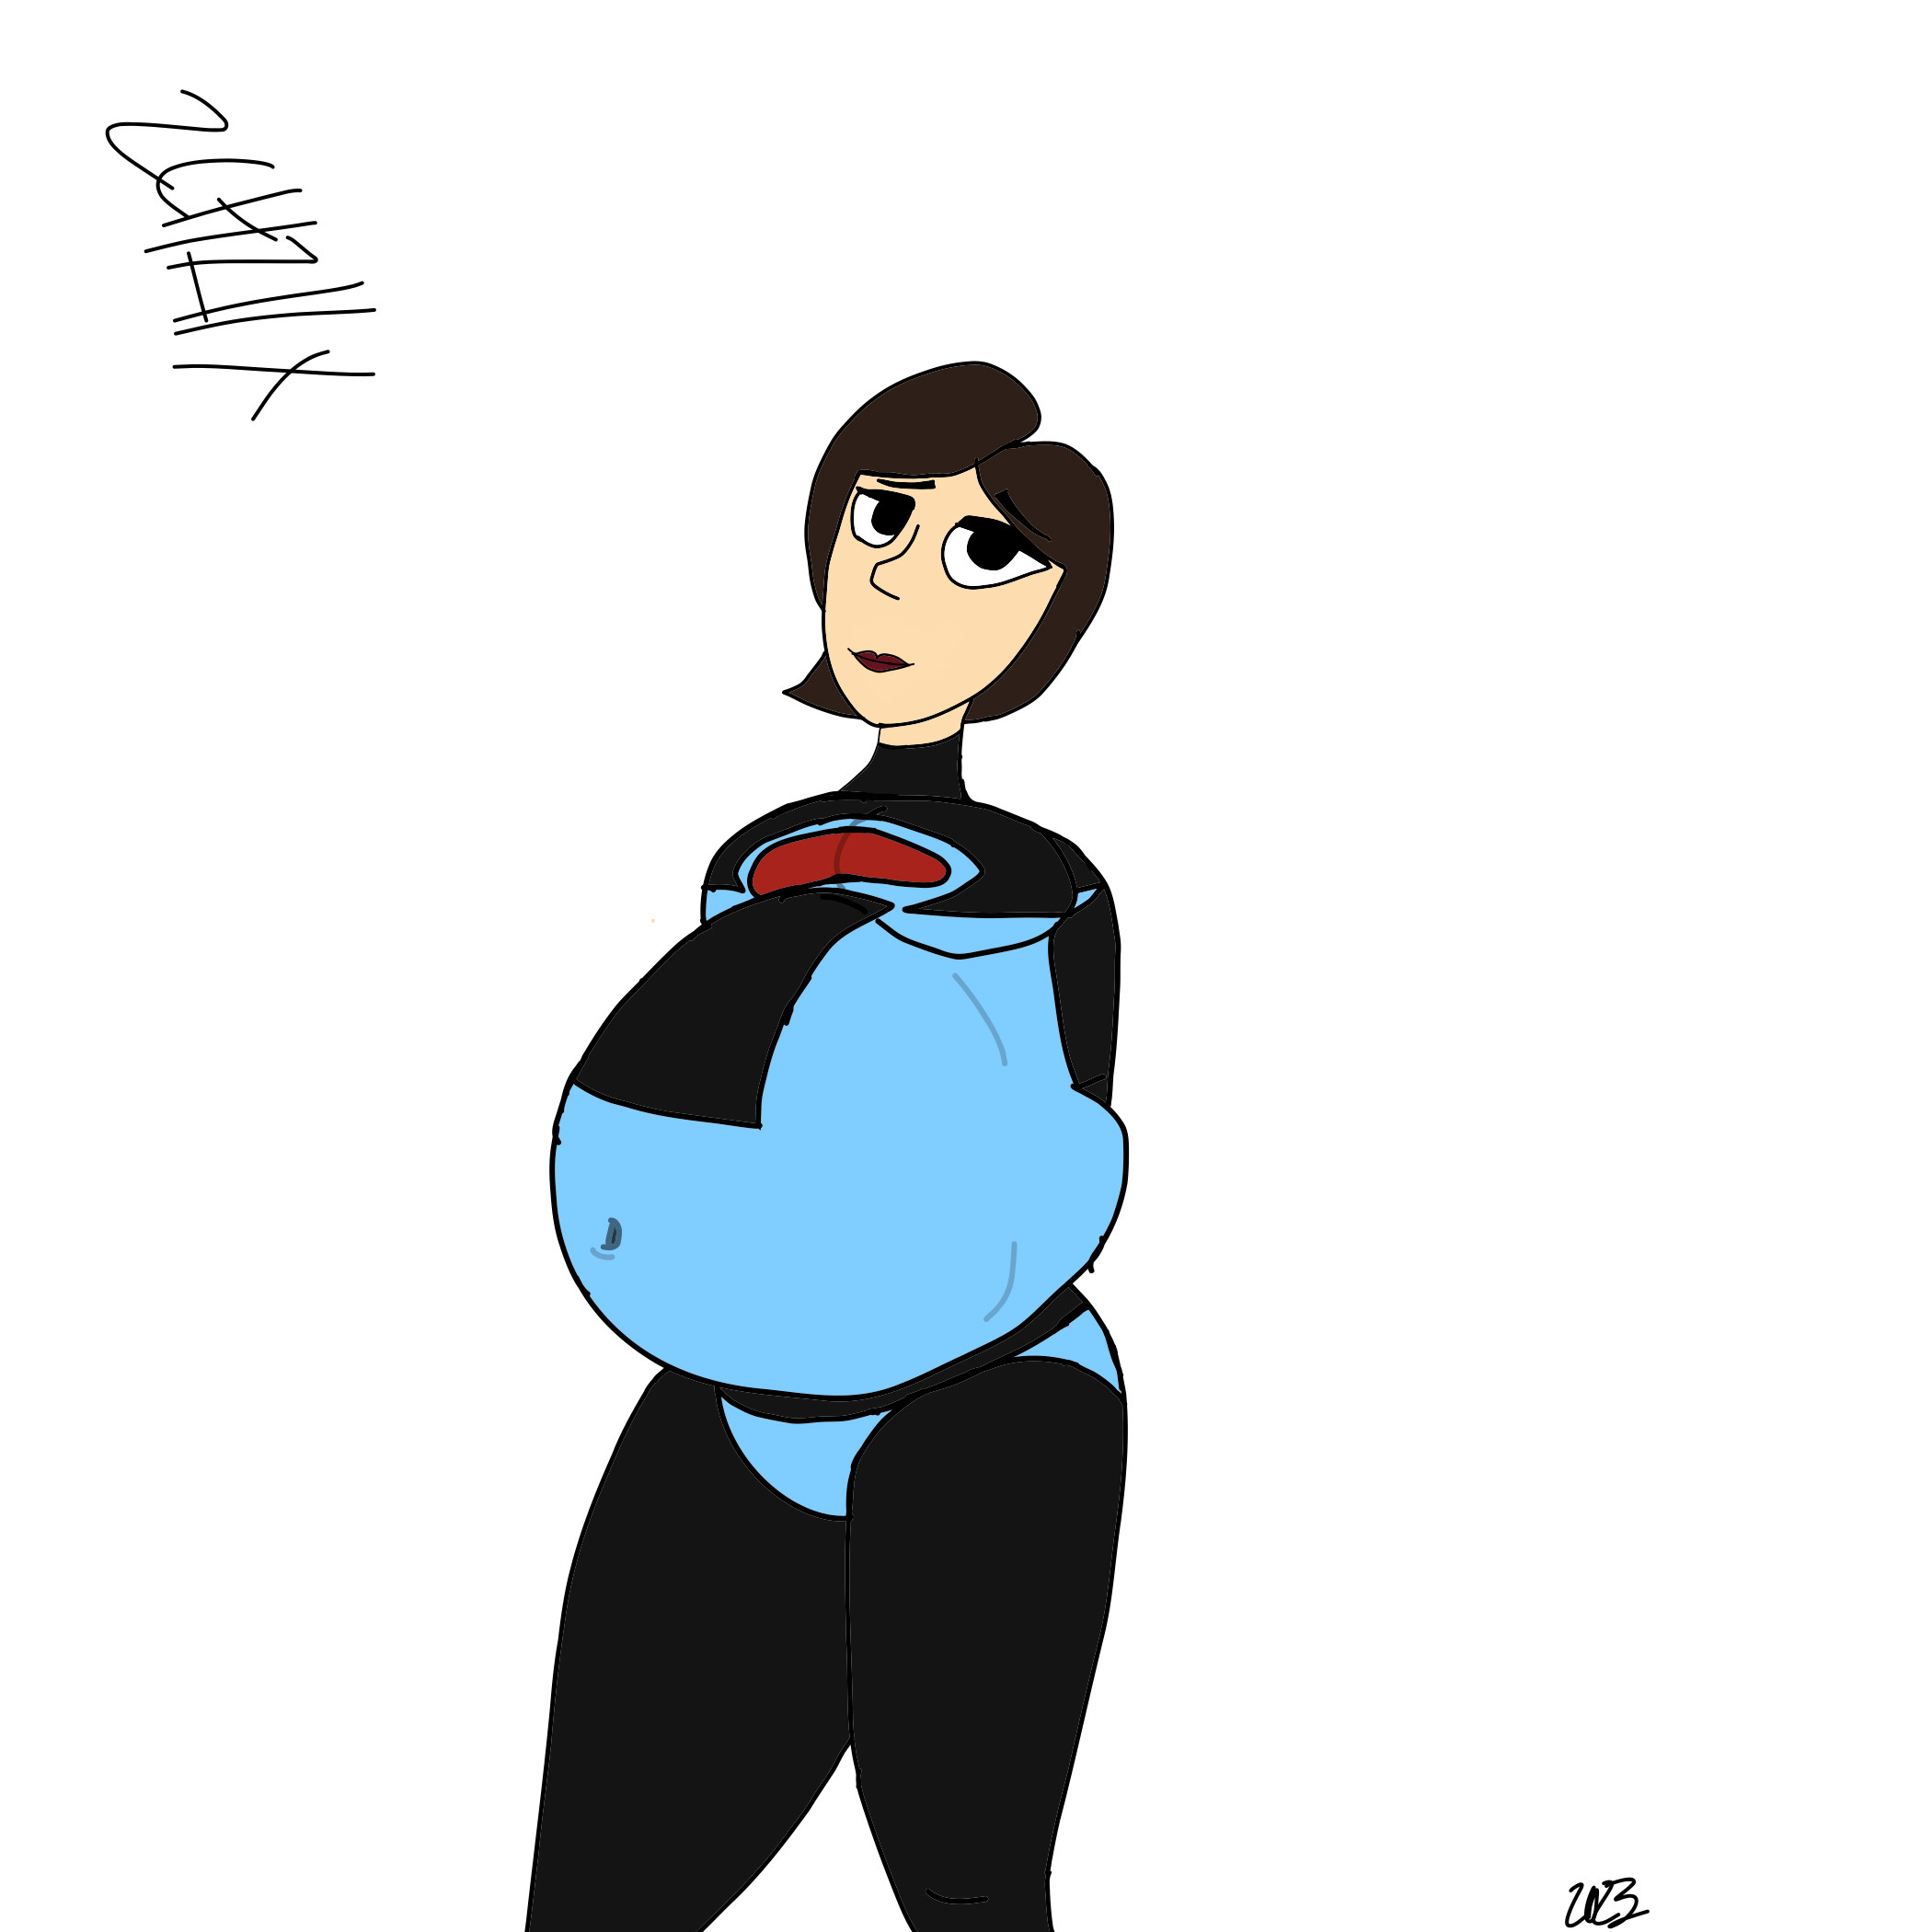 Ms. Incredi-belly? by 2chillx on DeviantArt